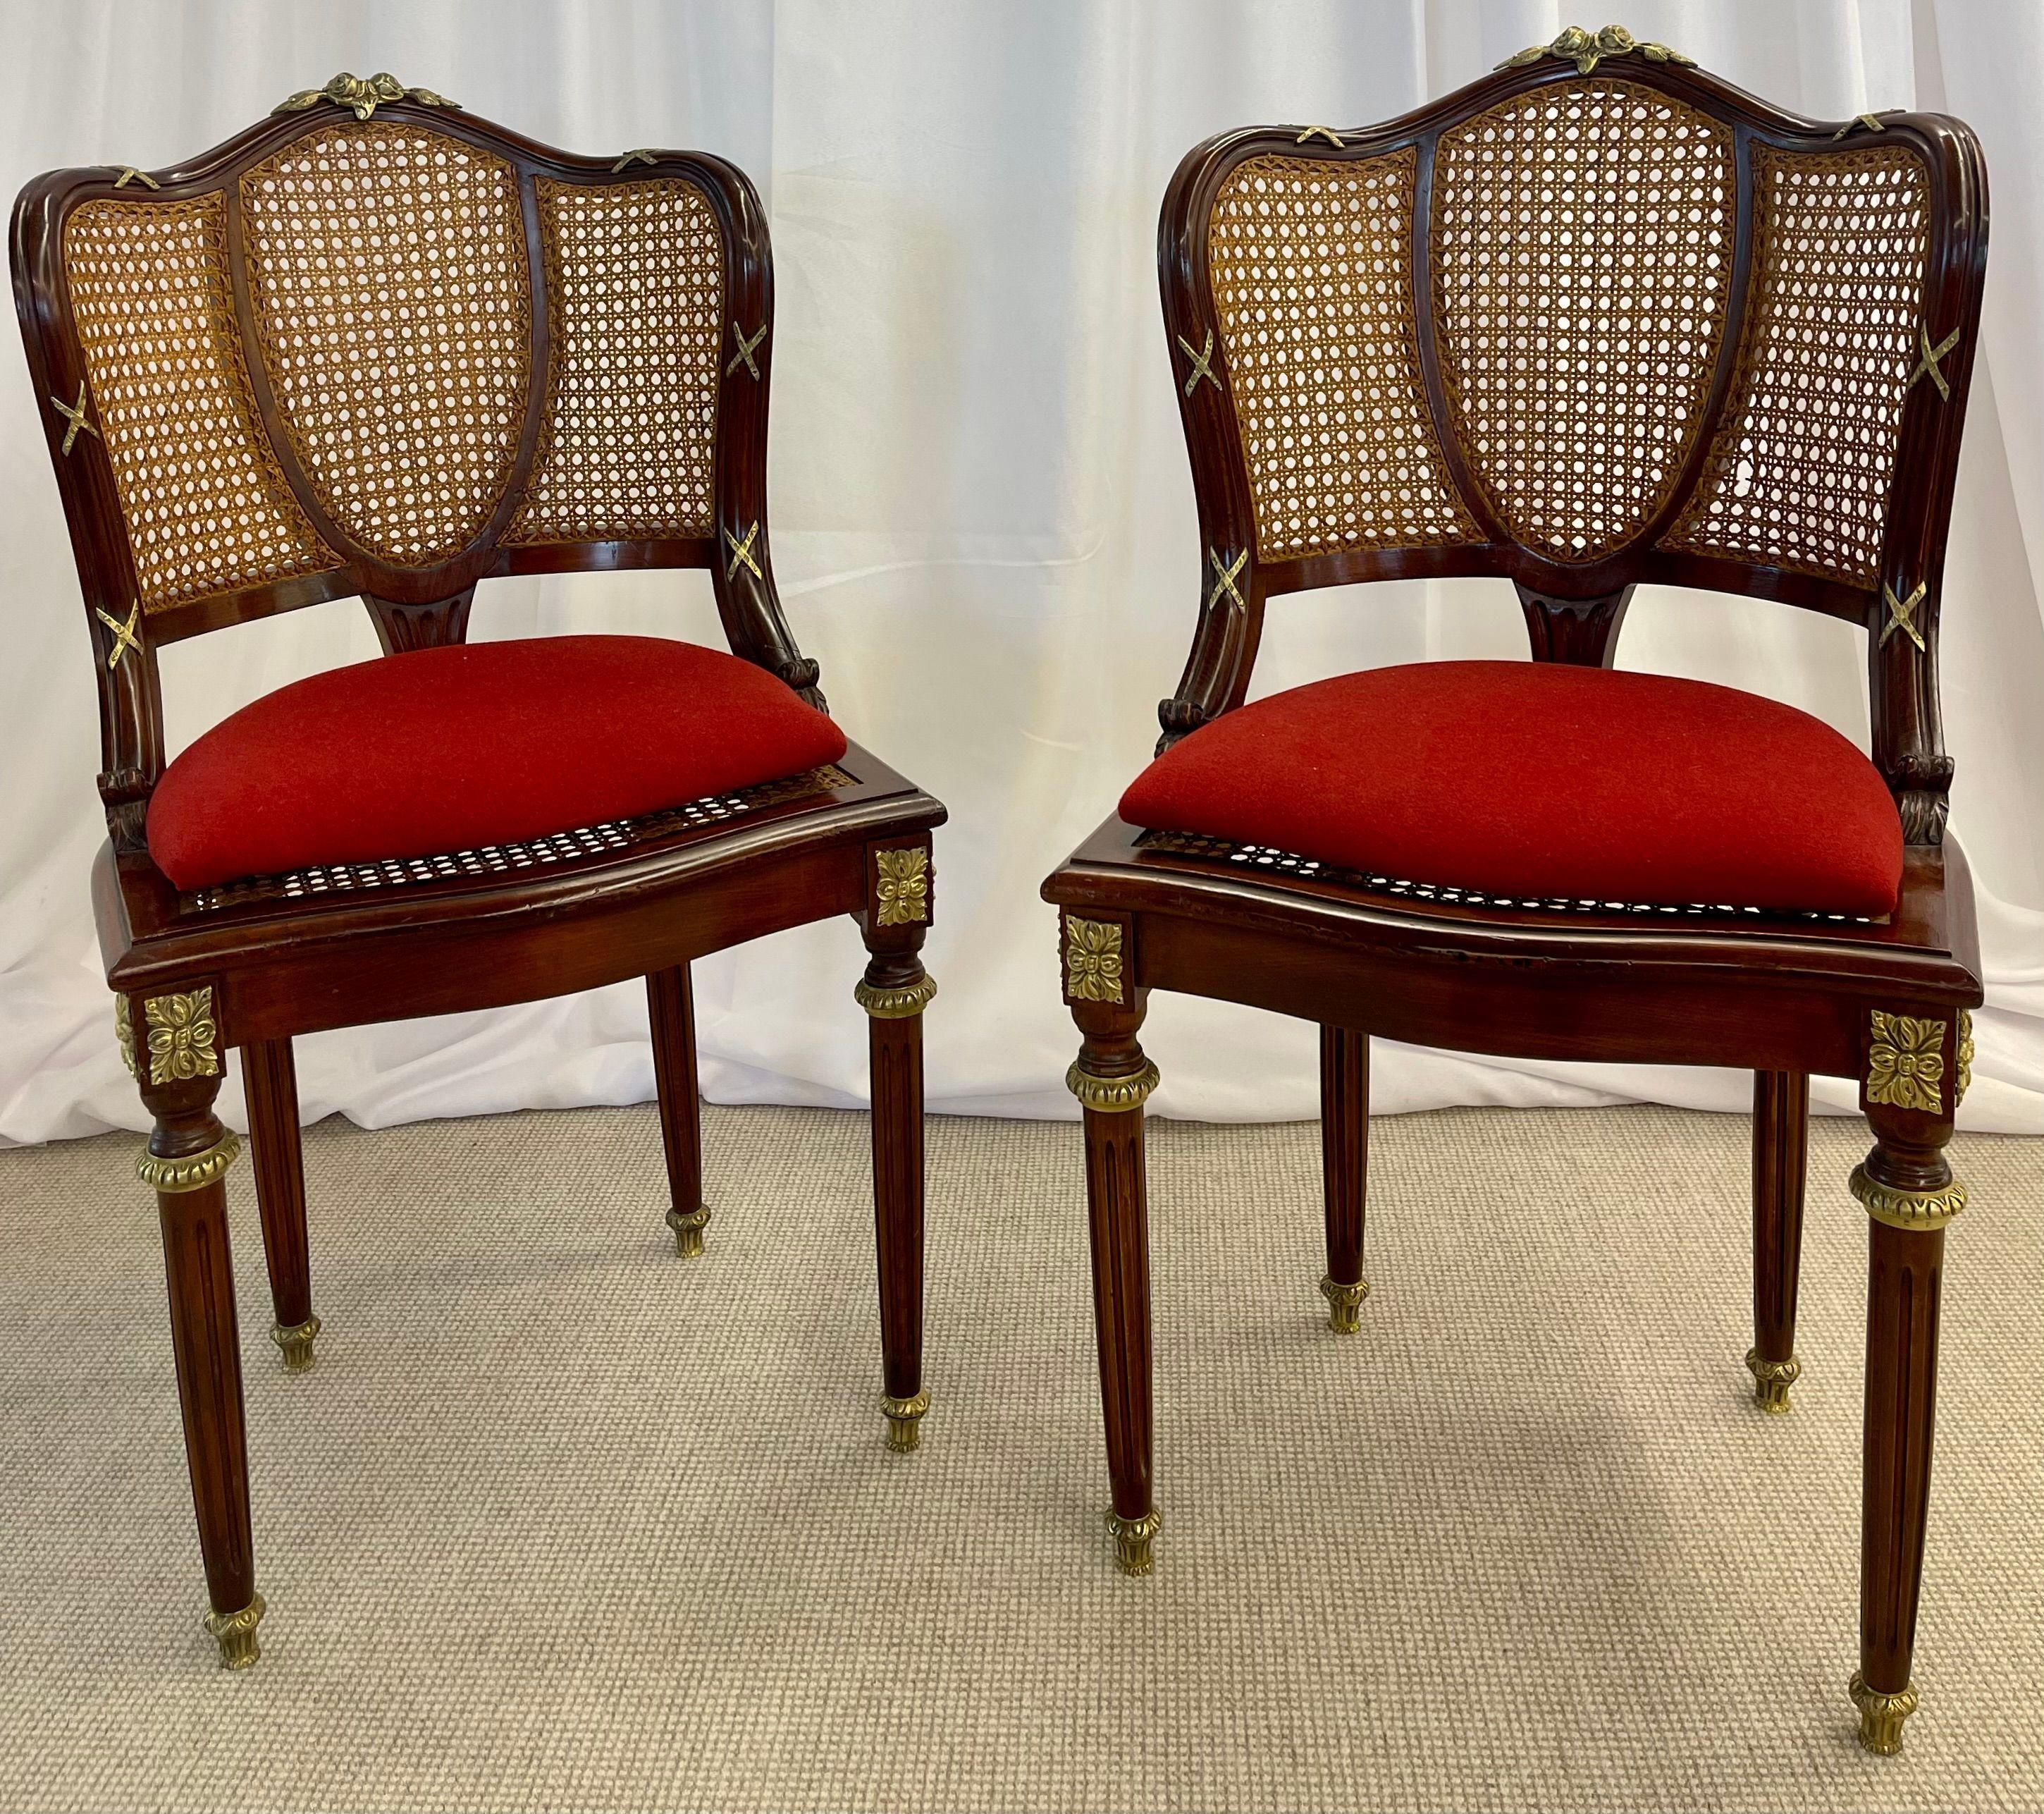 Pair of fine bronze-mounted Louis XVI style dining chairs. This is a simply magnificent pair of Maison Jansen fashioned solid mahogany dining chairs each having all-over bronze mounts. This pair having recently been cleaned and the wood French